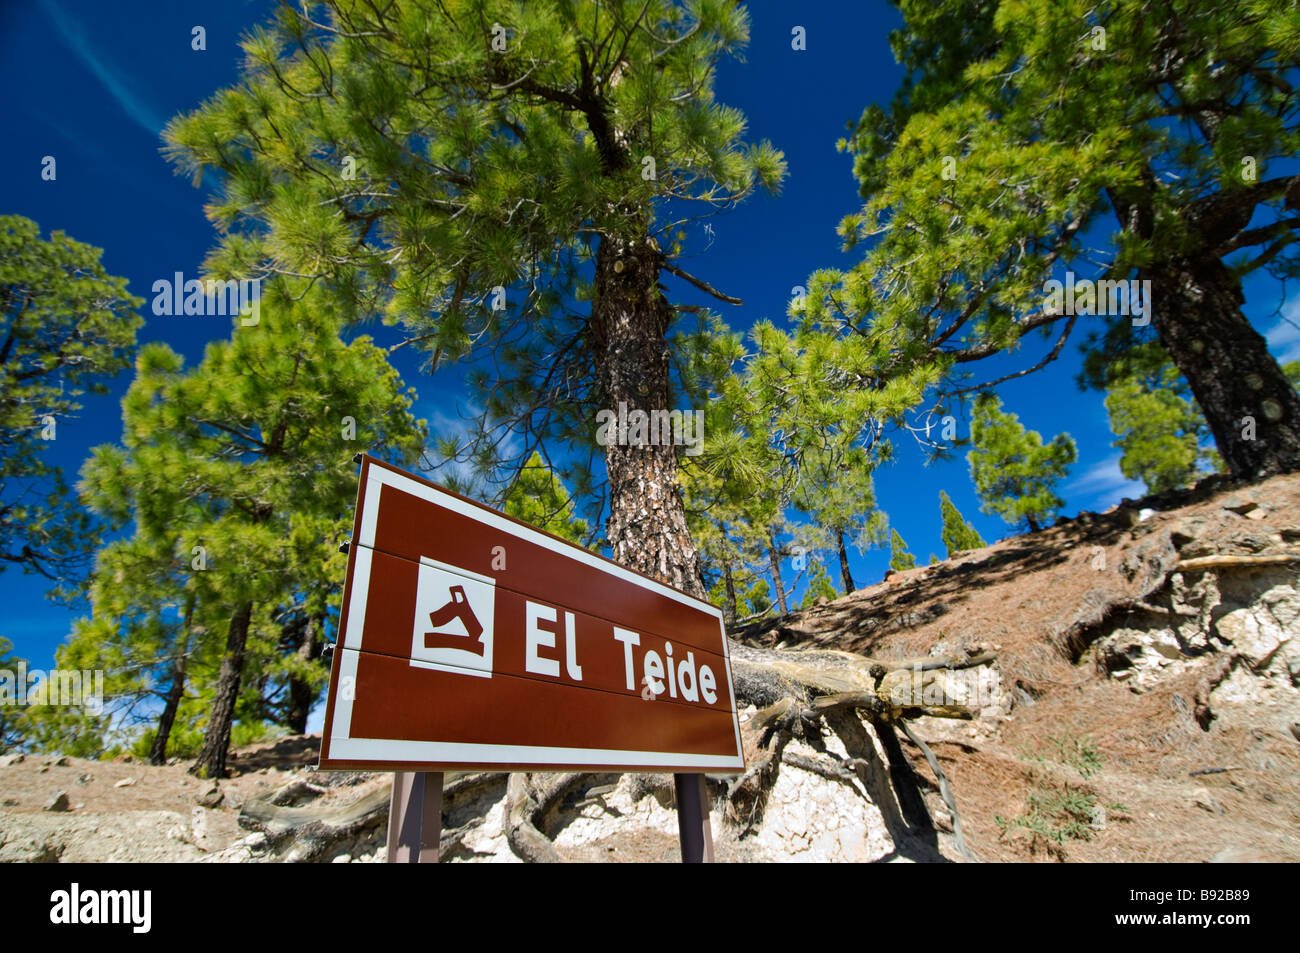 MOUNT TEIDE TENERIFE Road sign on the slopes of Mount Teide National Park Tenerife Canary Islands Spain Stock Photo